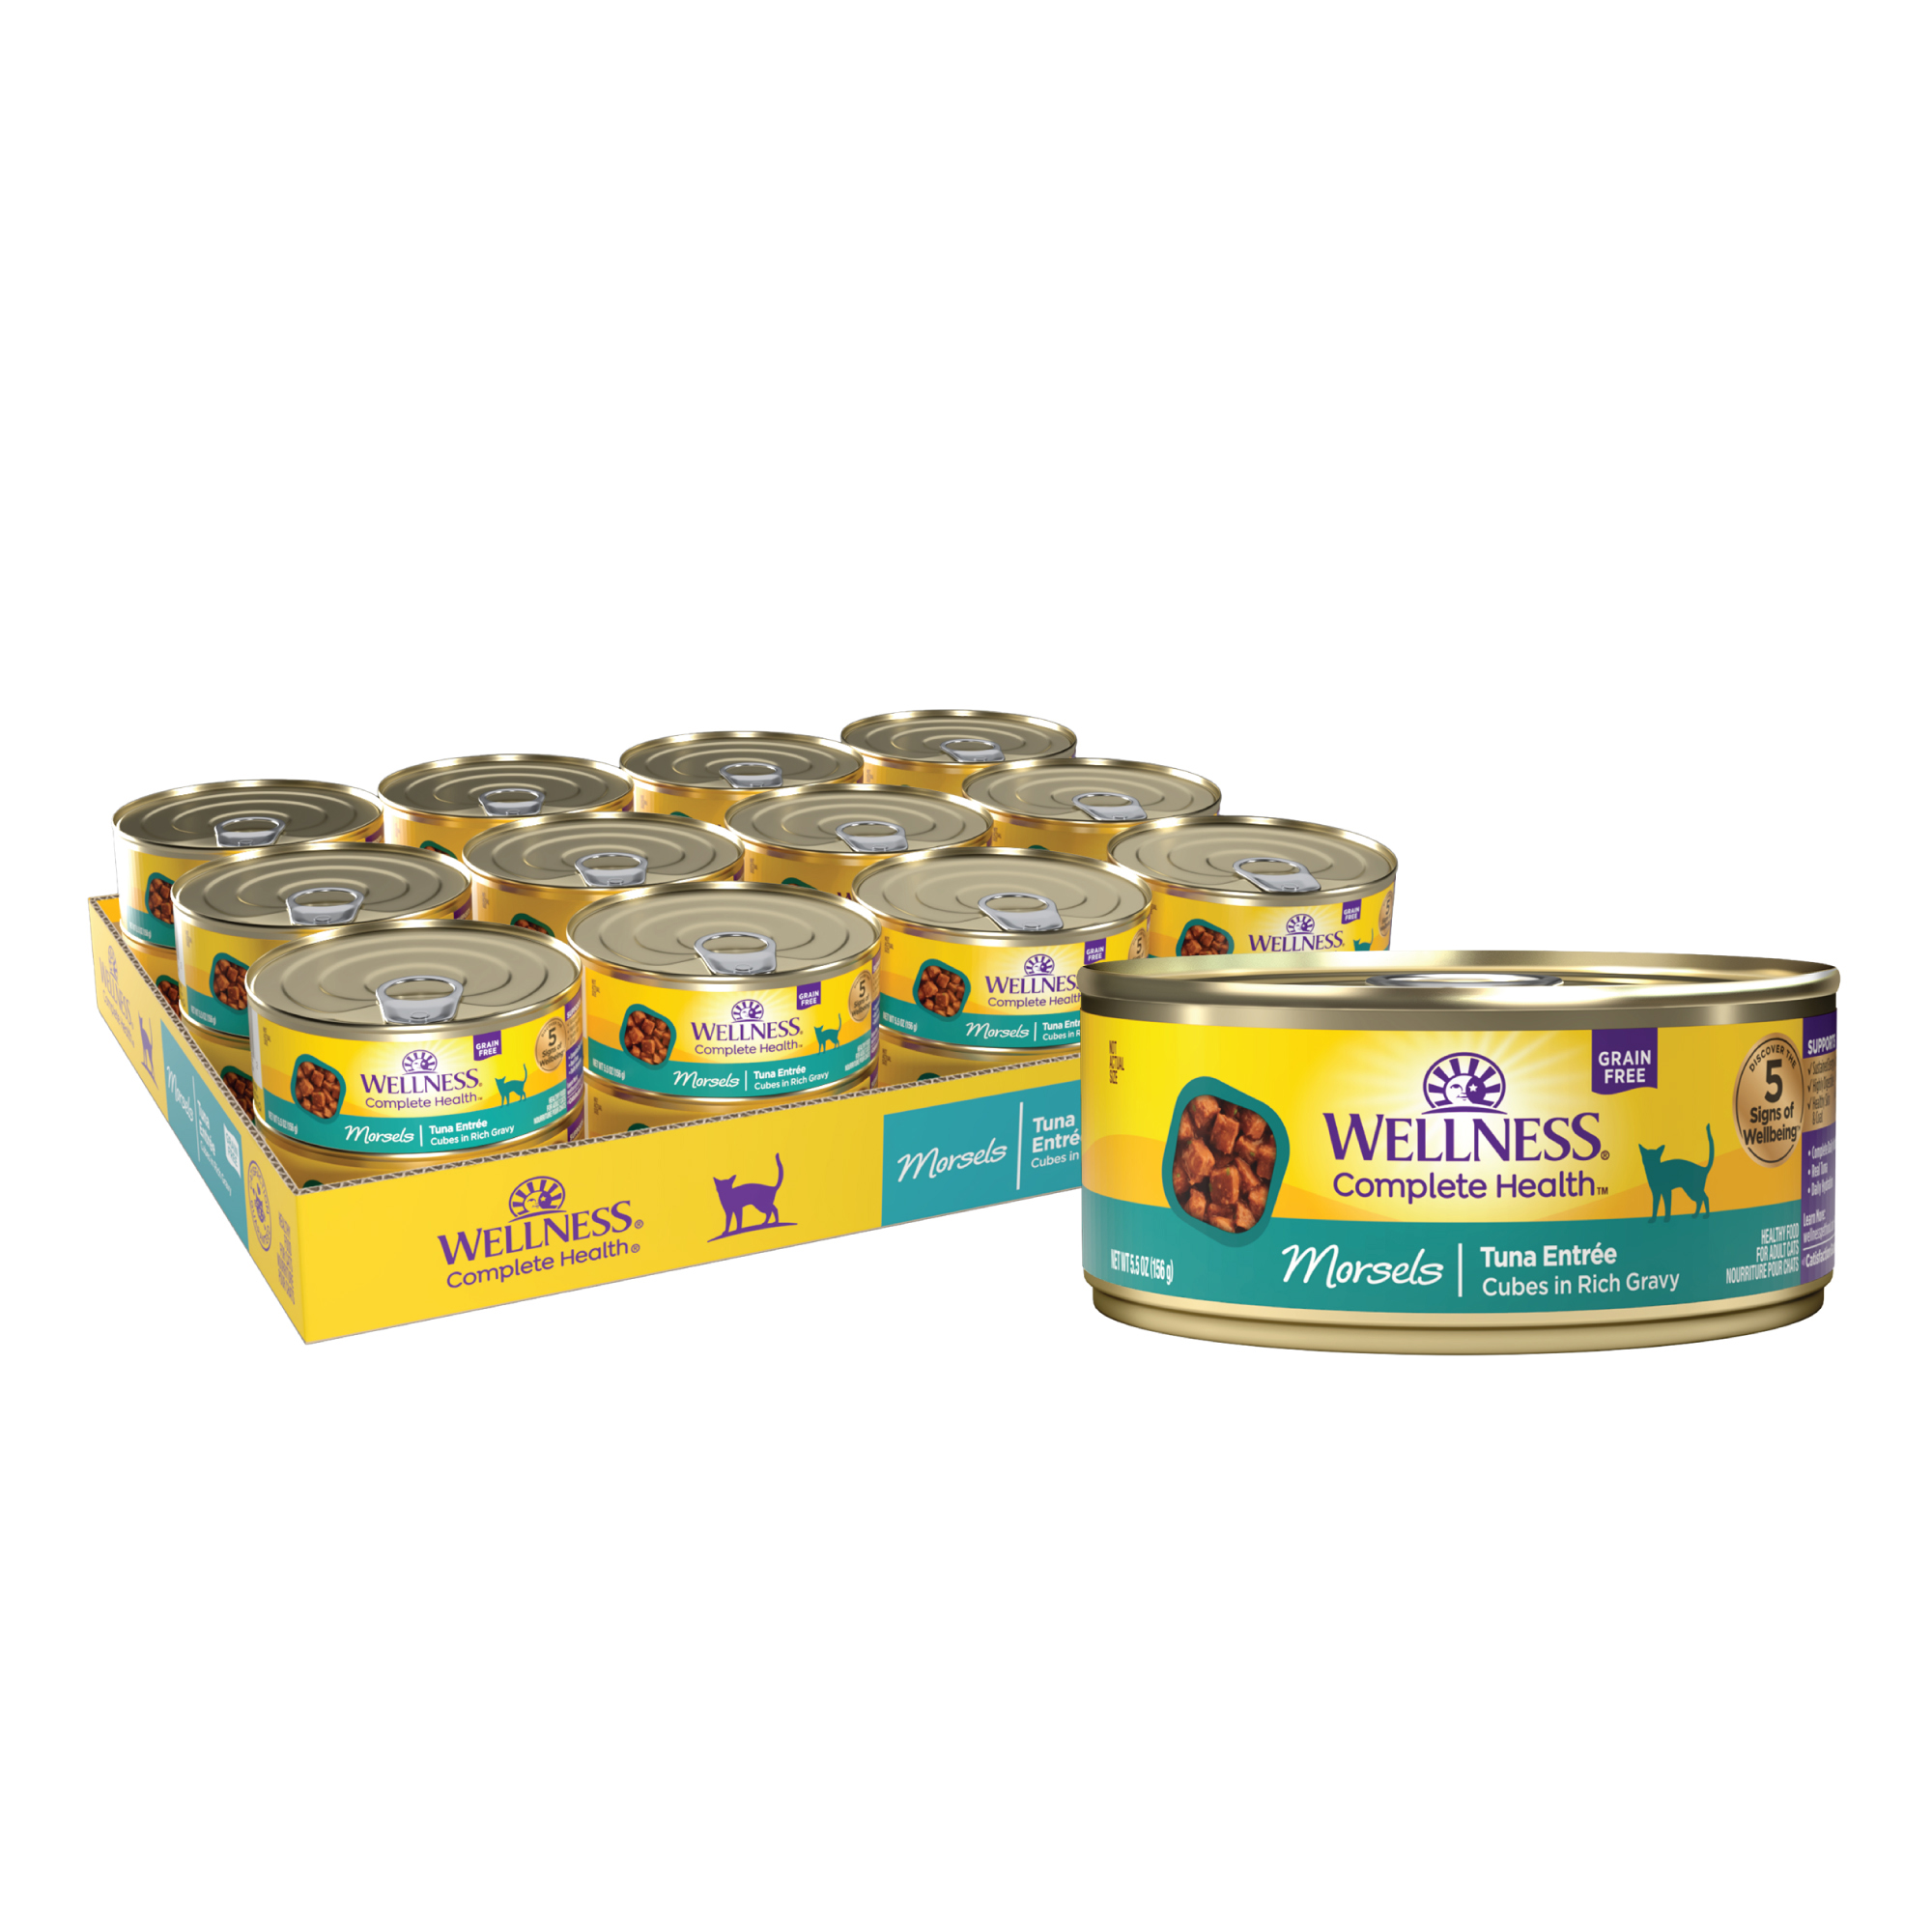 Wellness Complete Health Natural Grain Free Wet Canned Cat Food, Cubed Tuna Entree, 5.5-Ounce Can (Pack of 24) - image 1 of 9